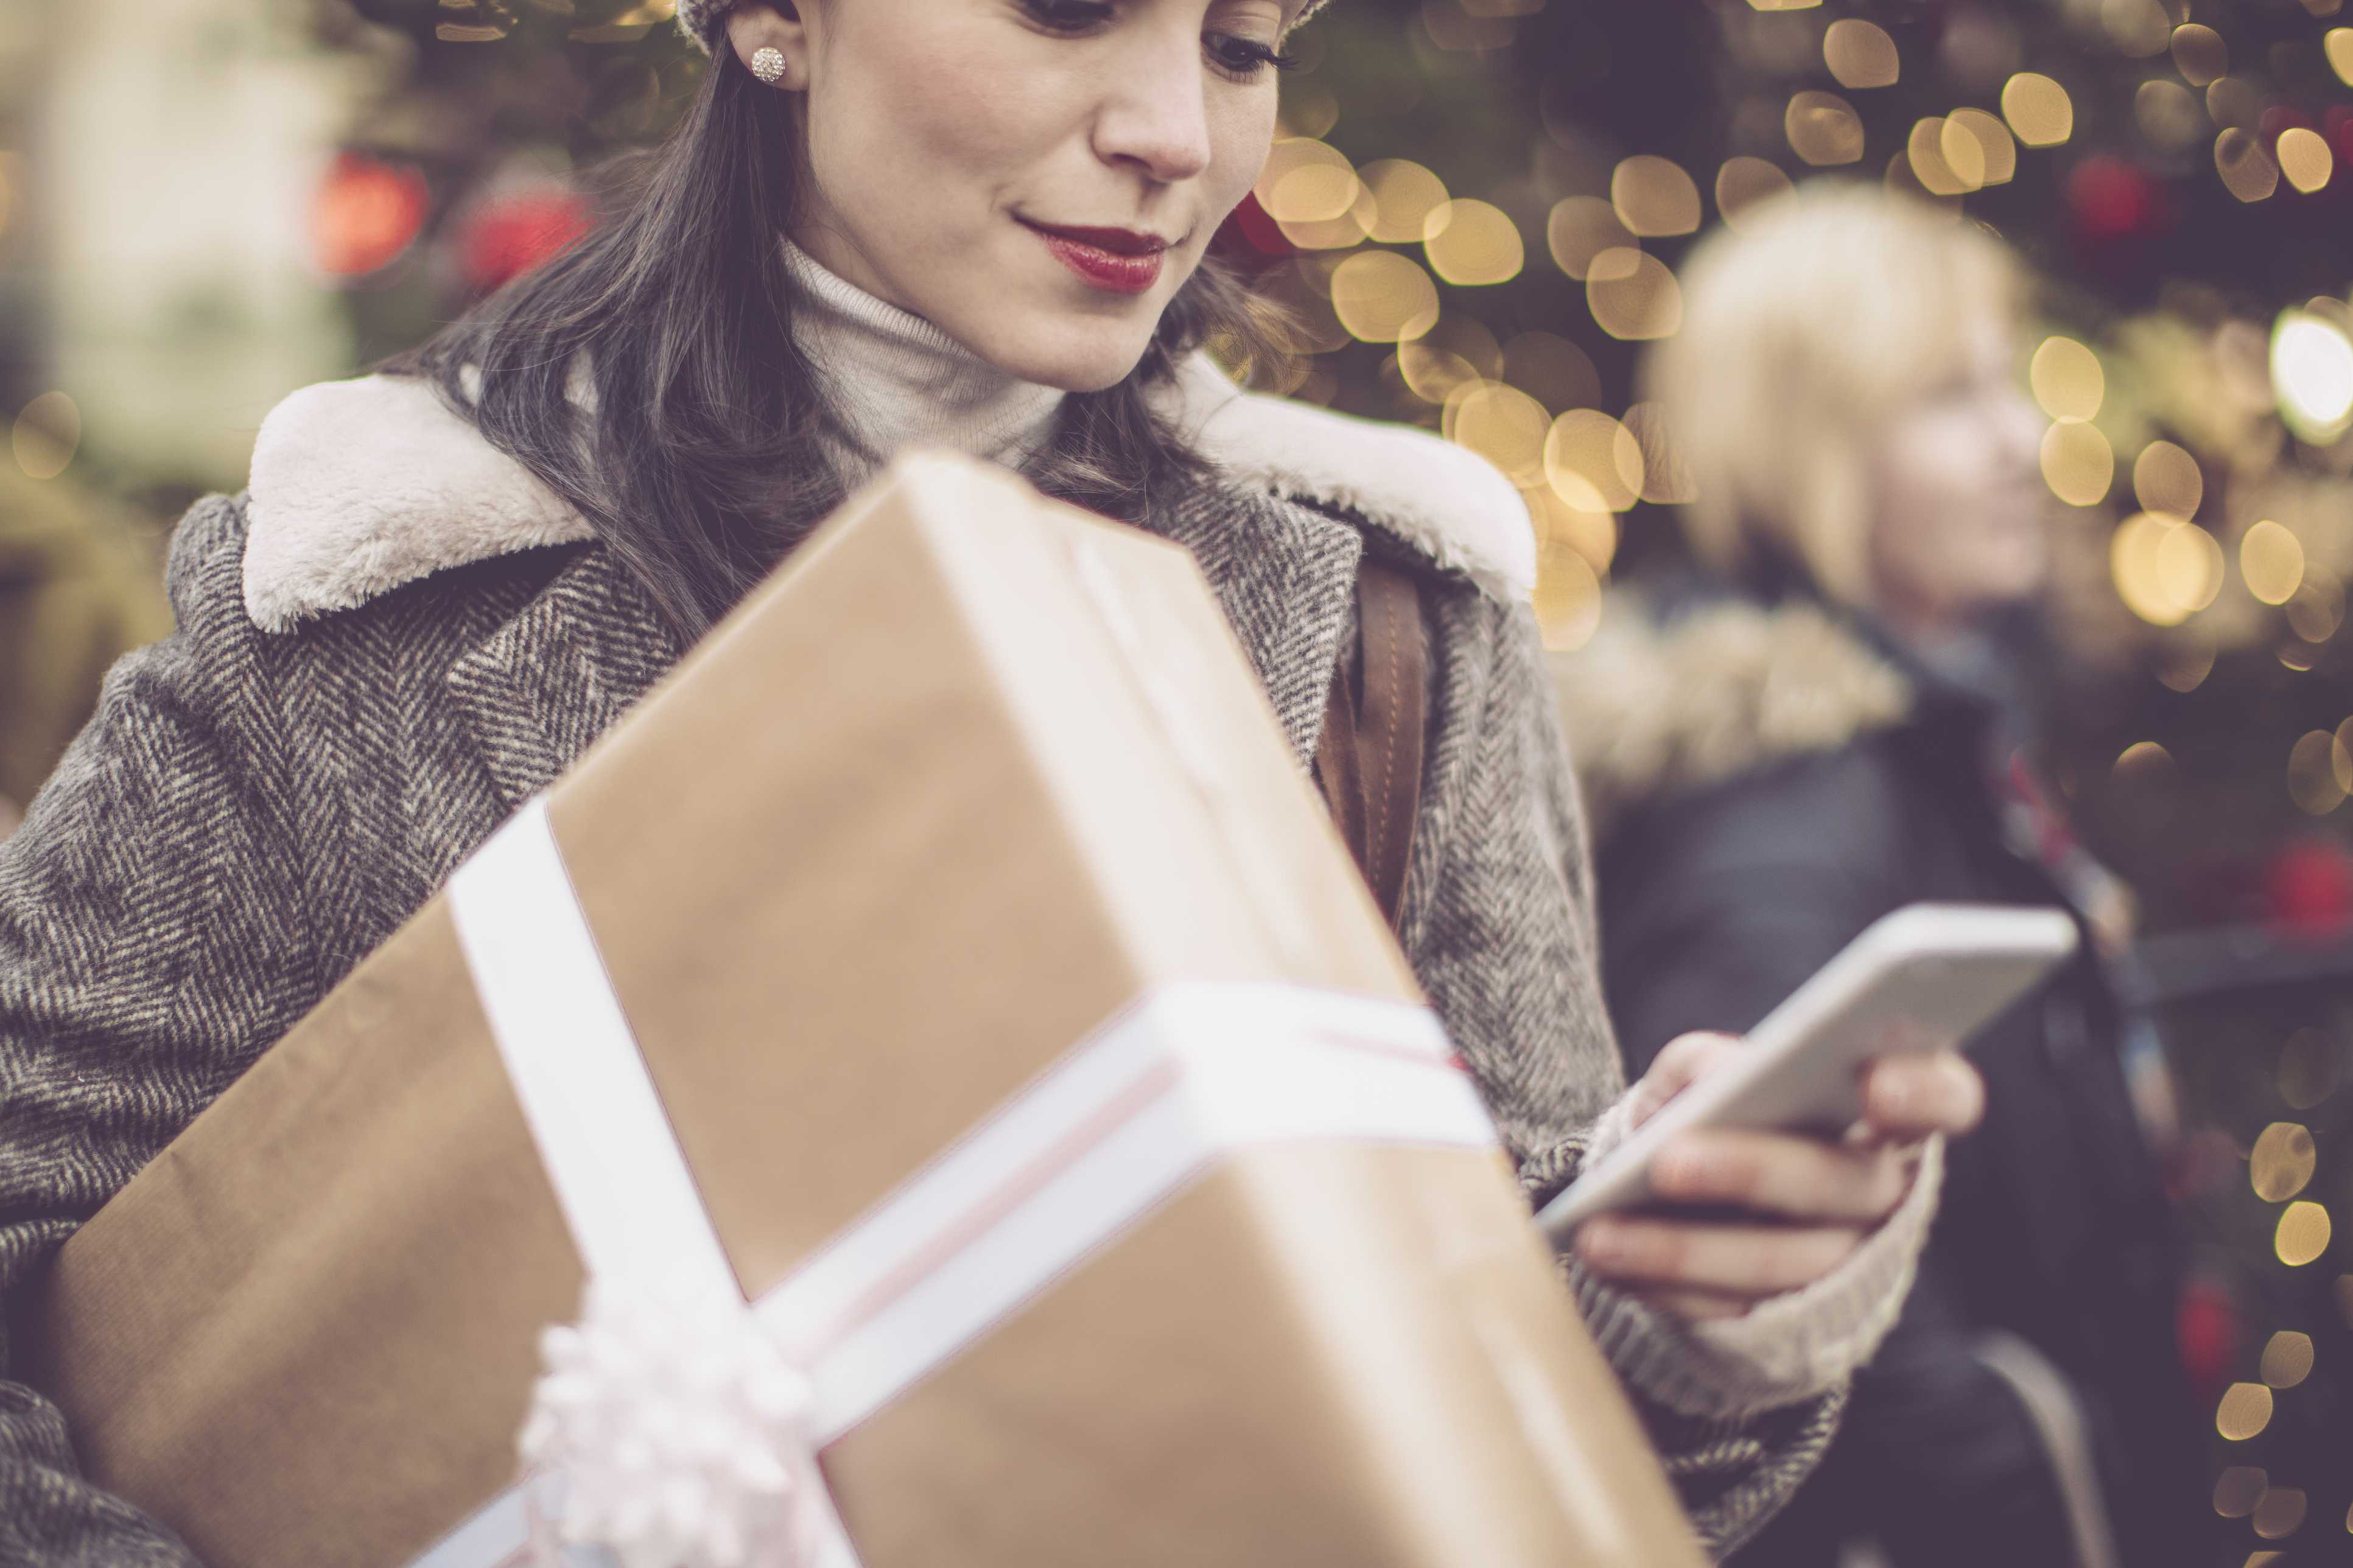 6 easy ways to save money on holiday shopping